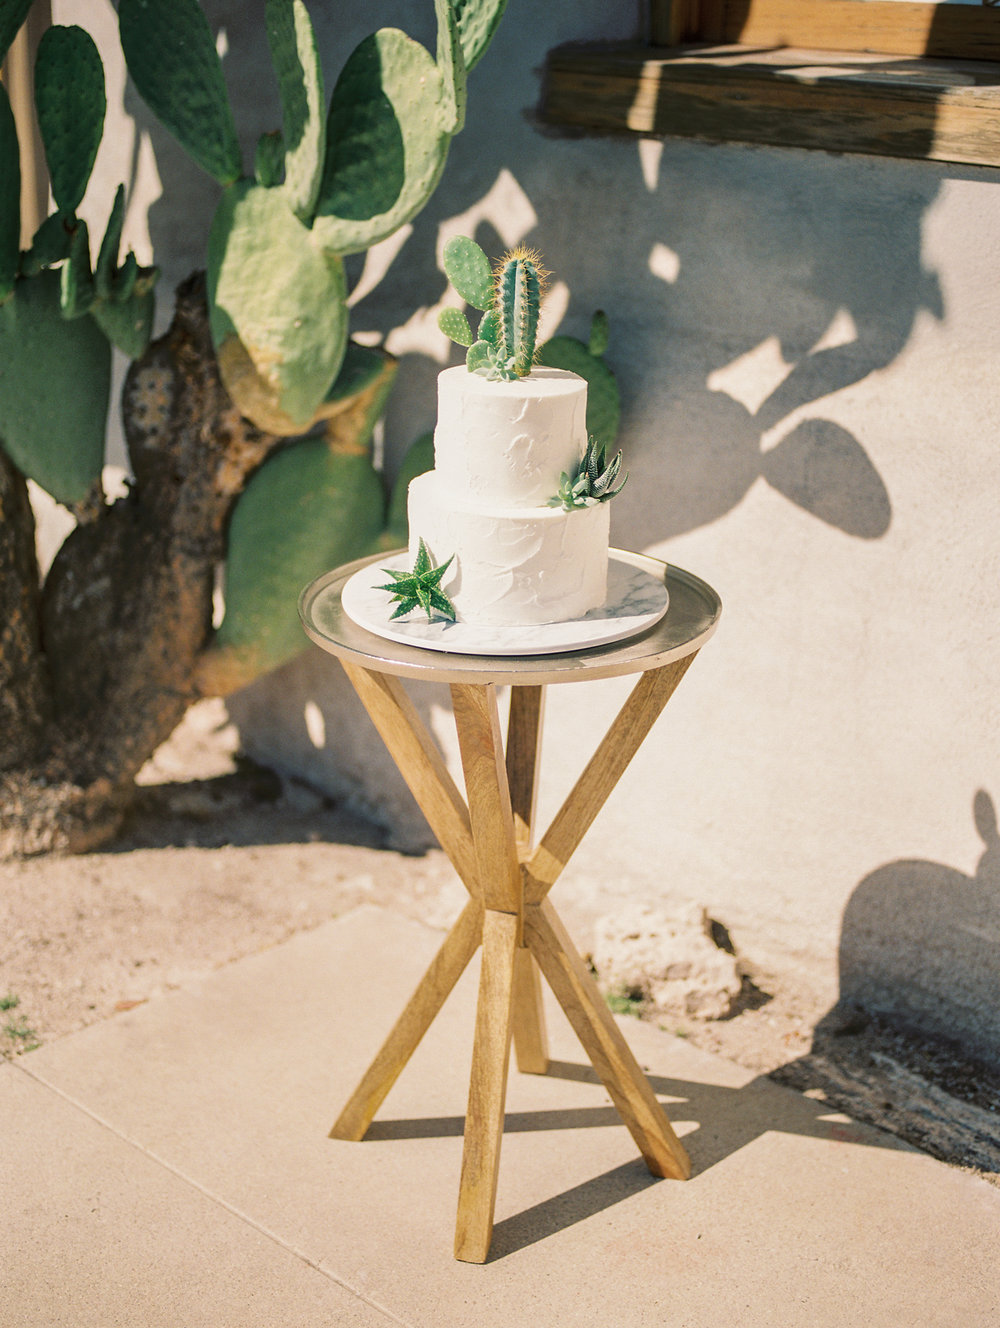  Beautiful white wedding cake by Crumbs cake Boutique with a real cactus and succulent cake topper!&nbsp; 